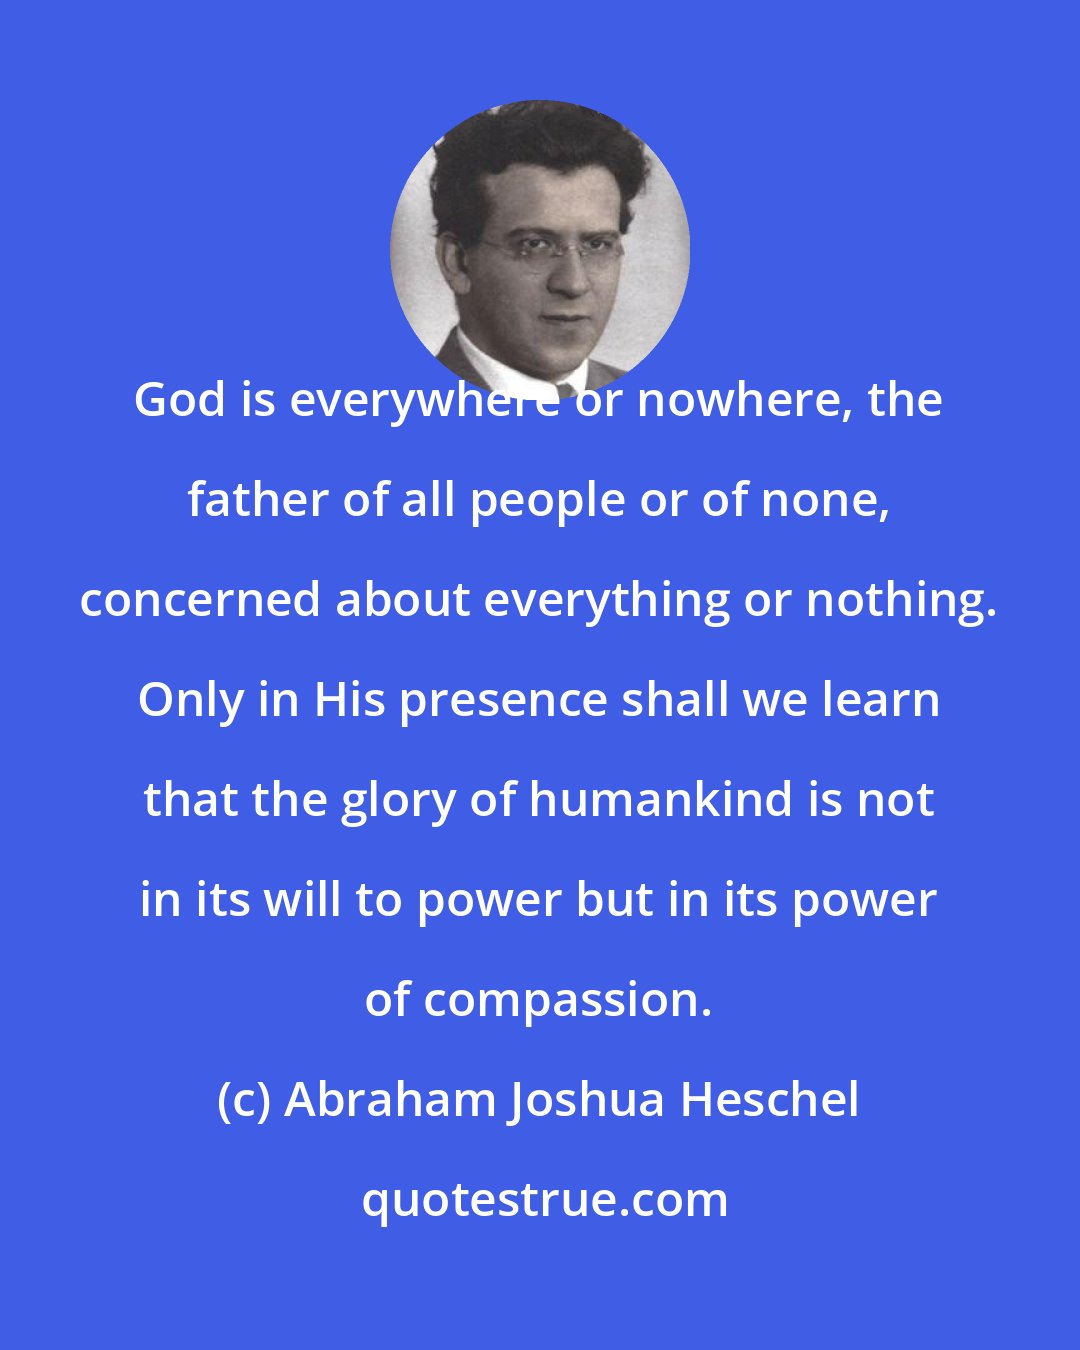 Abraham Joshua Heschel: God is everywhere or nowhere, the father of all people or of none, concerned about everything or nothing. Only in His presence shall we learn that the glory of humankind is not in its will to power but in its power of compassion.